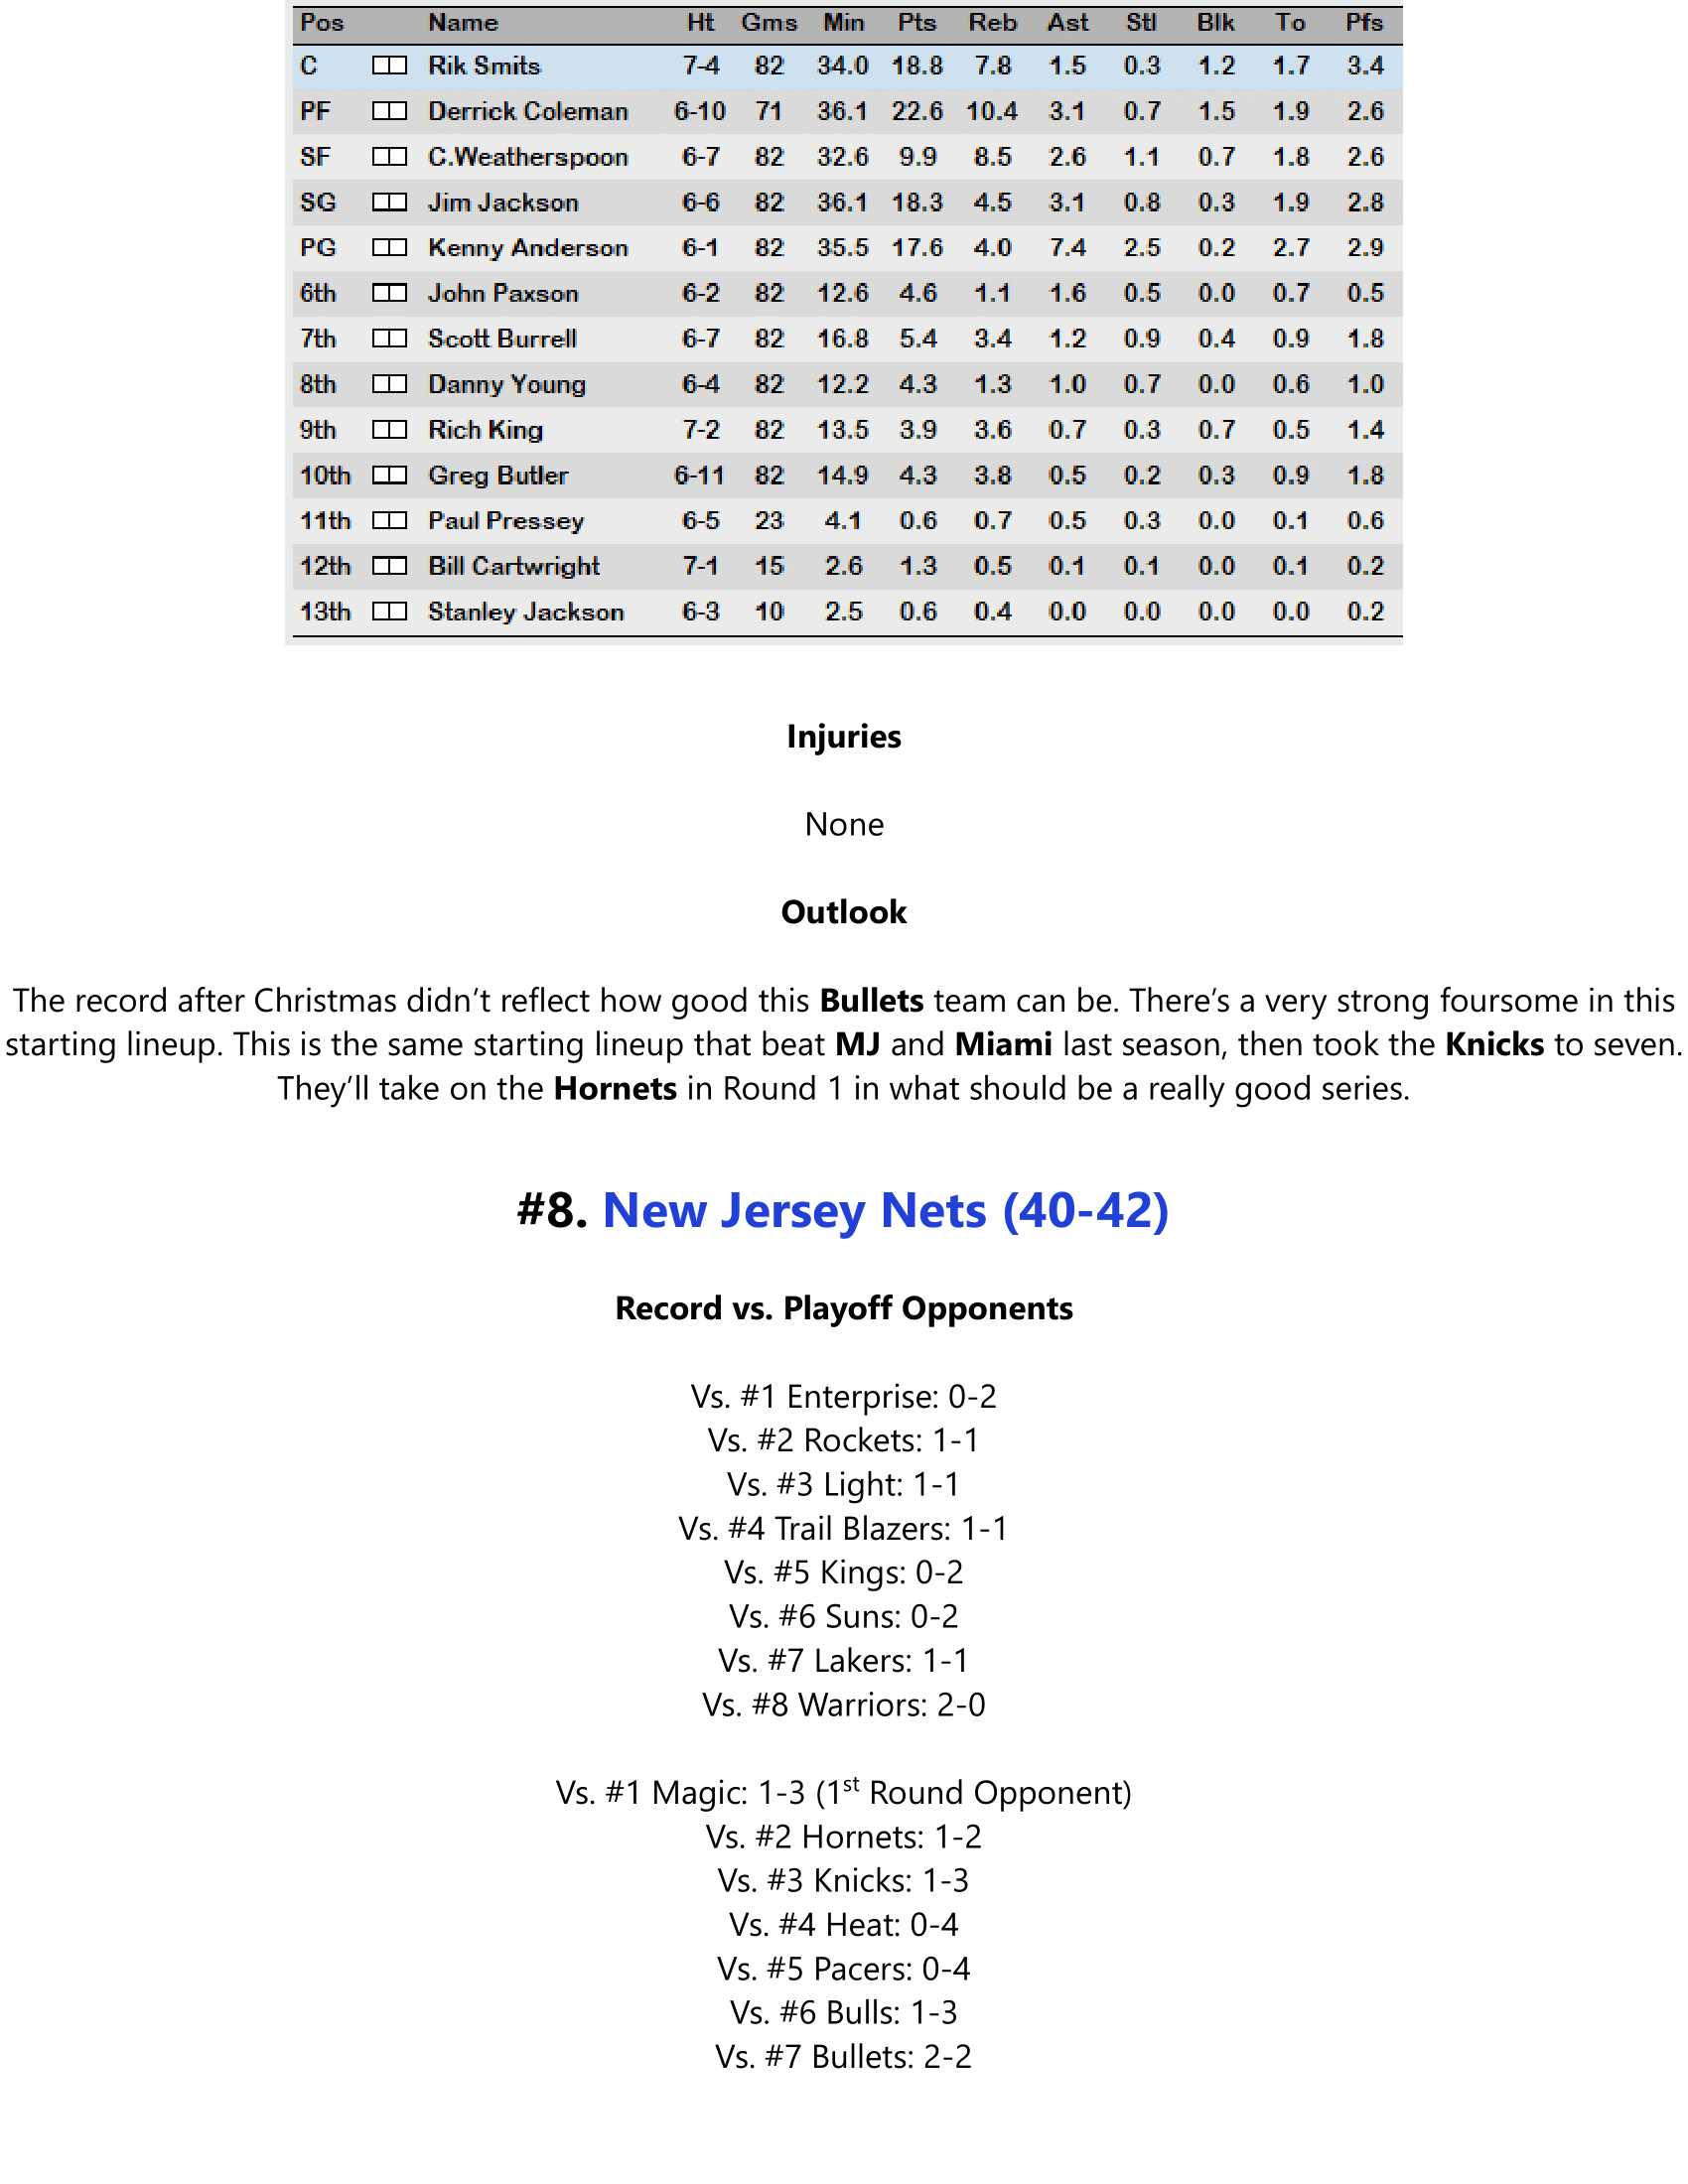 93-94-Part-4-Playoff-Preview-24.png